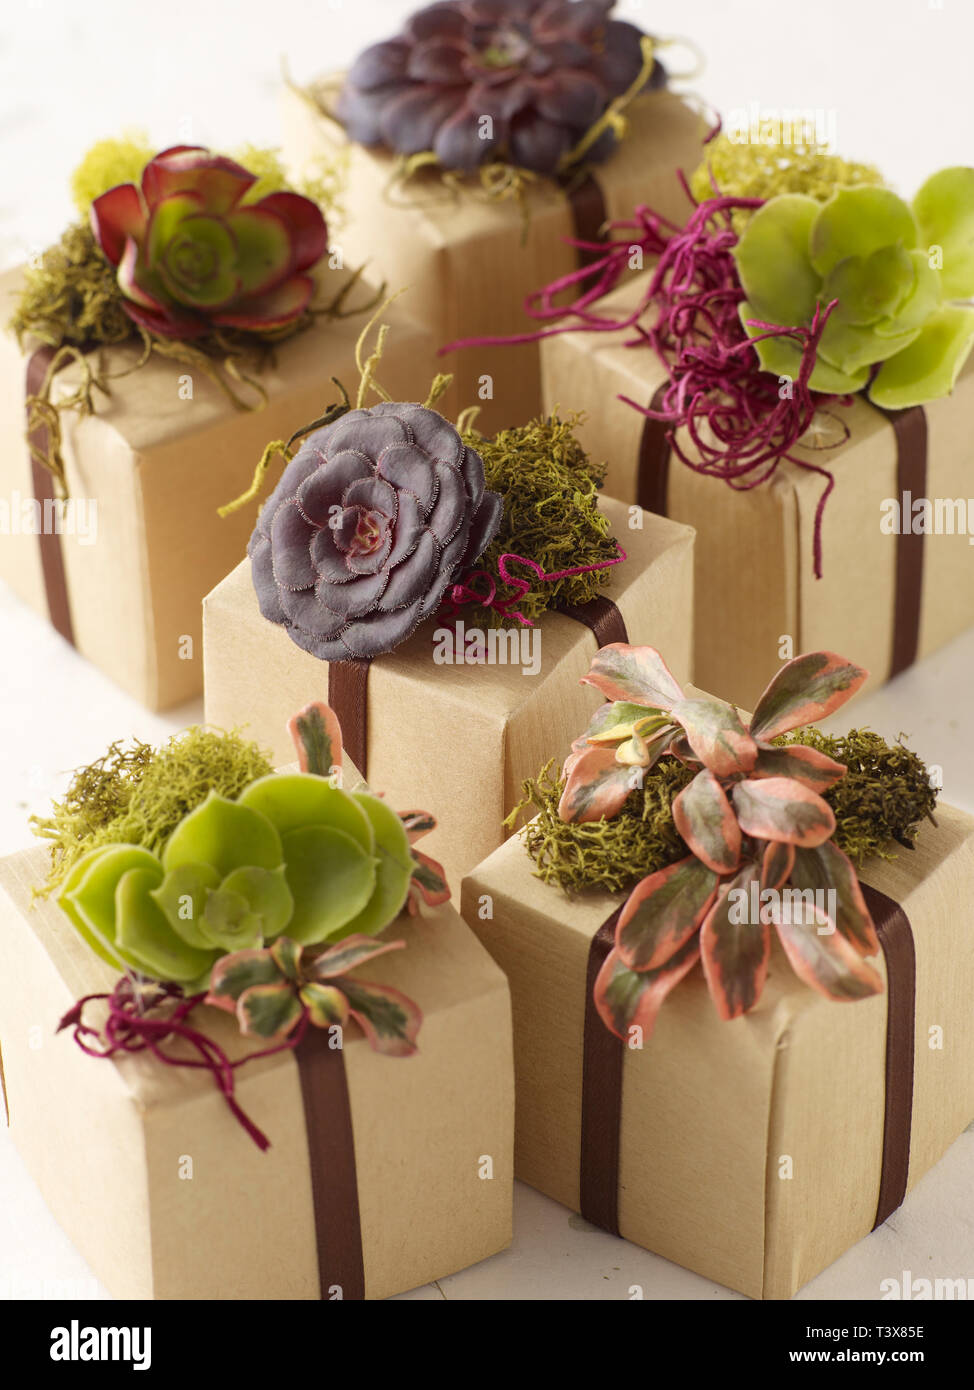 Rustic party favor gift boxes Stock Photo